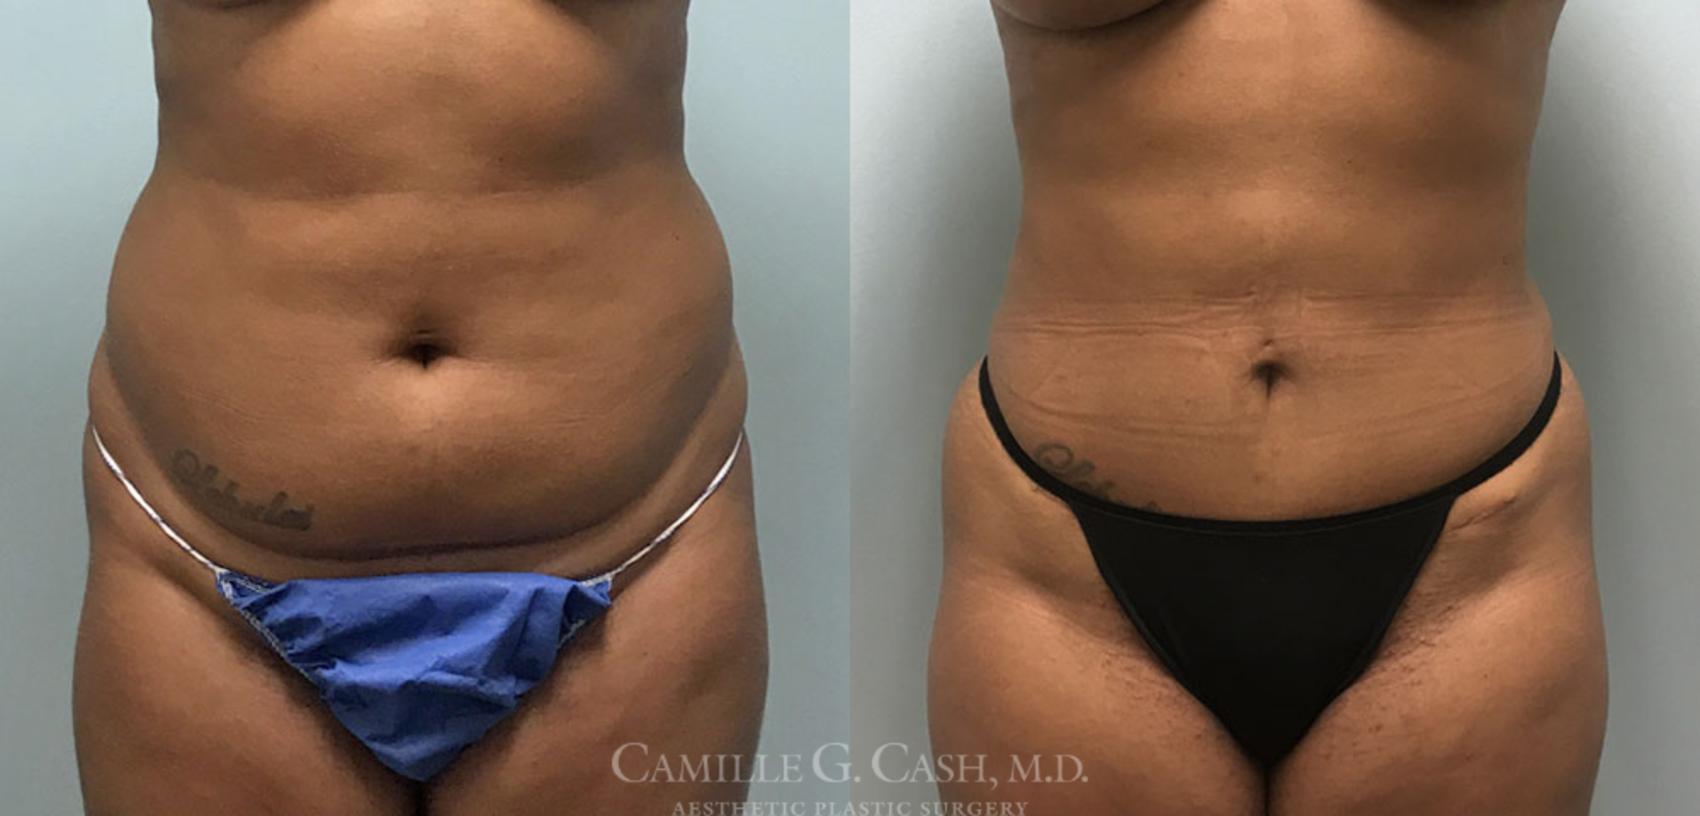 Before & After Tummy Tuck Case 360 View #1 View in Houston, TX